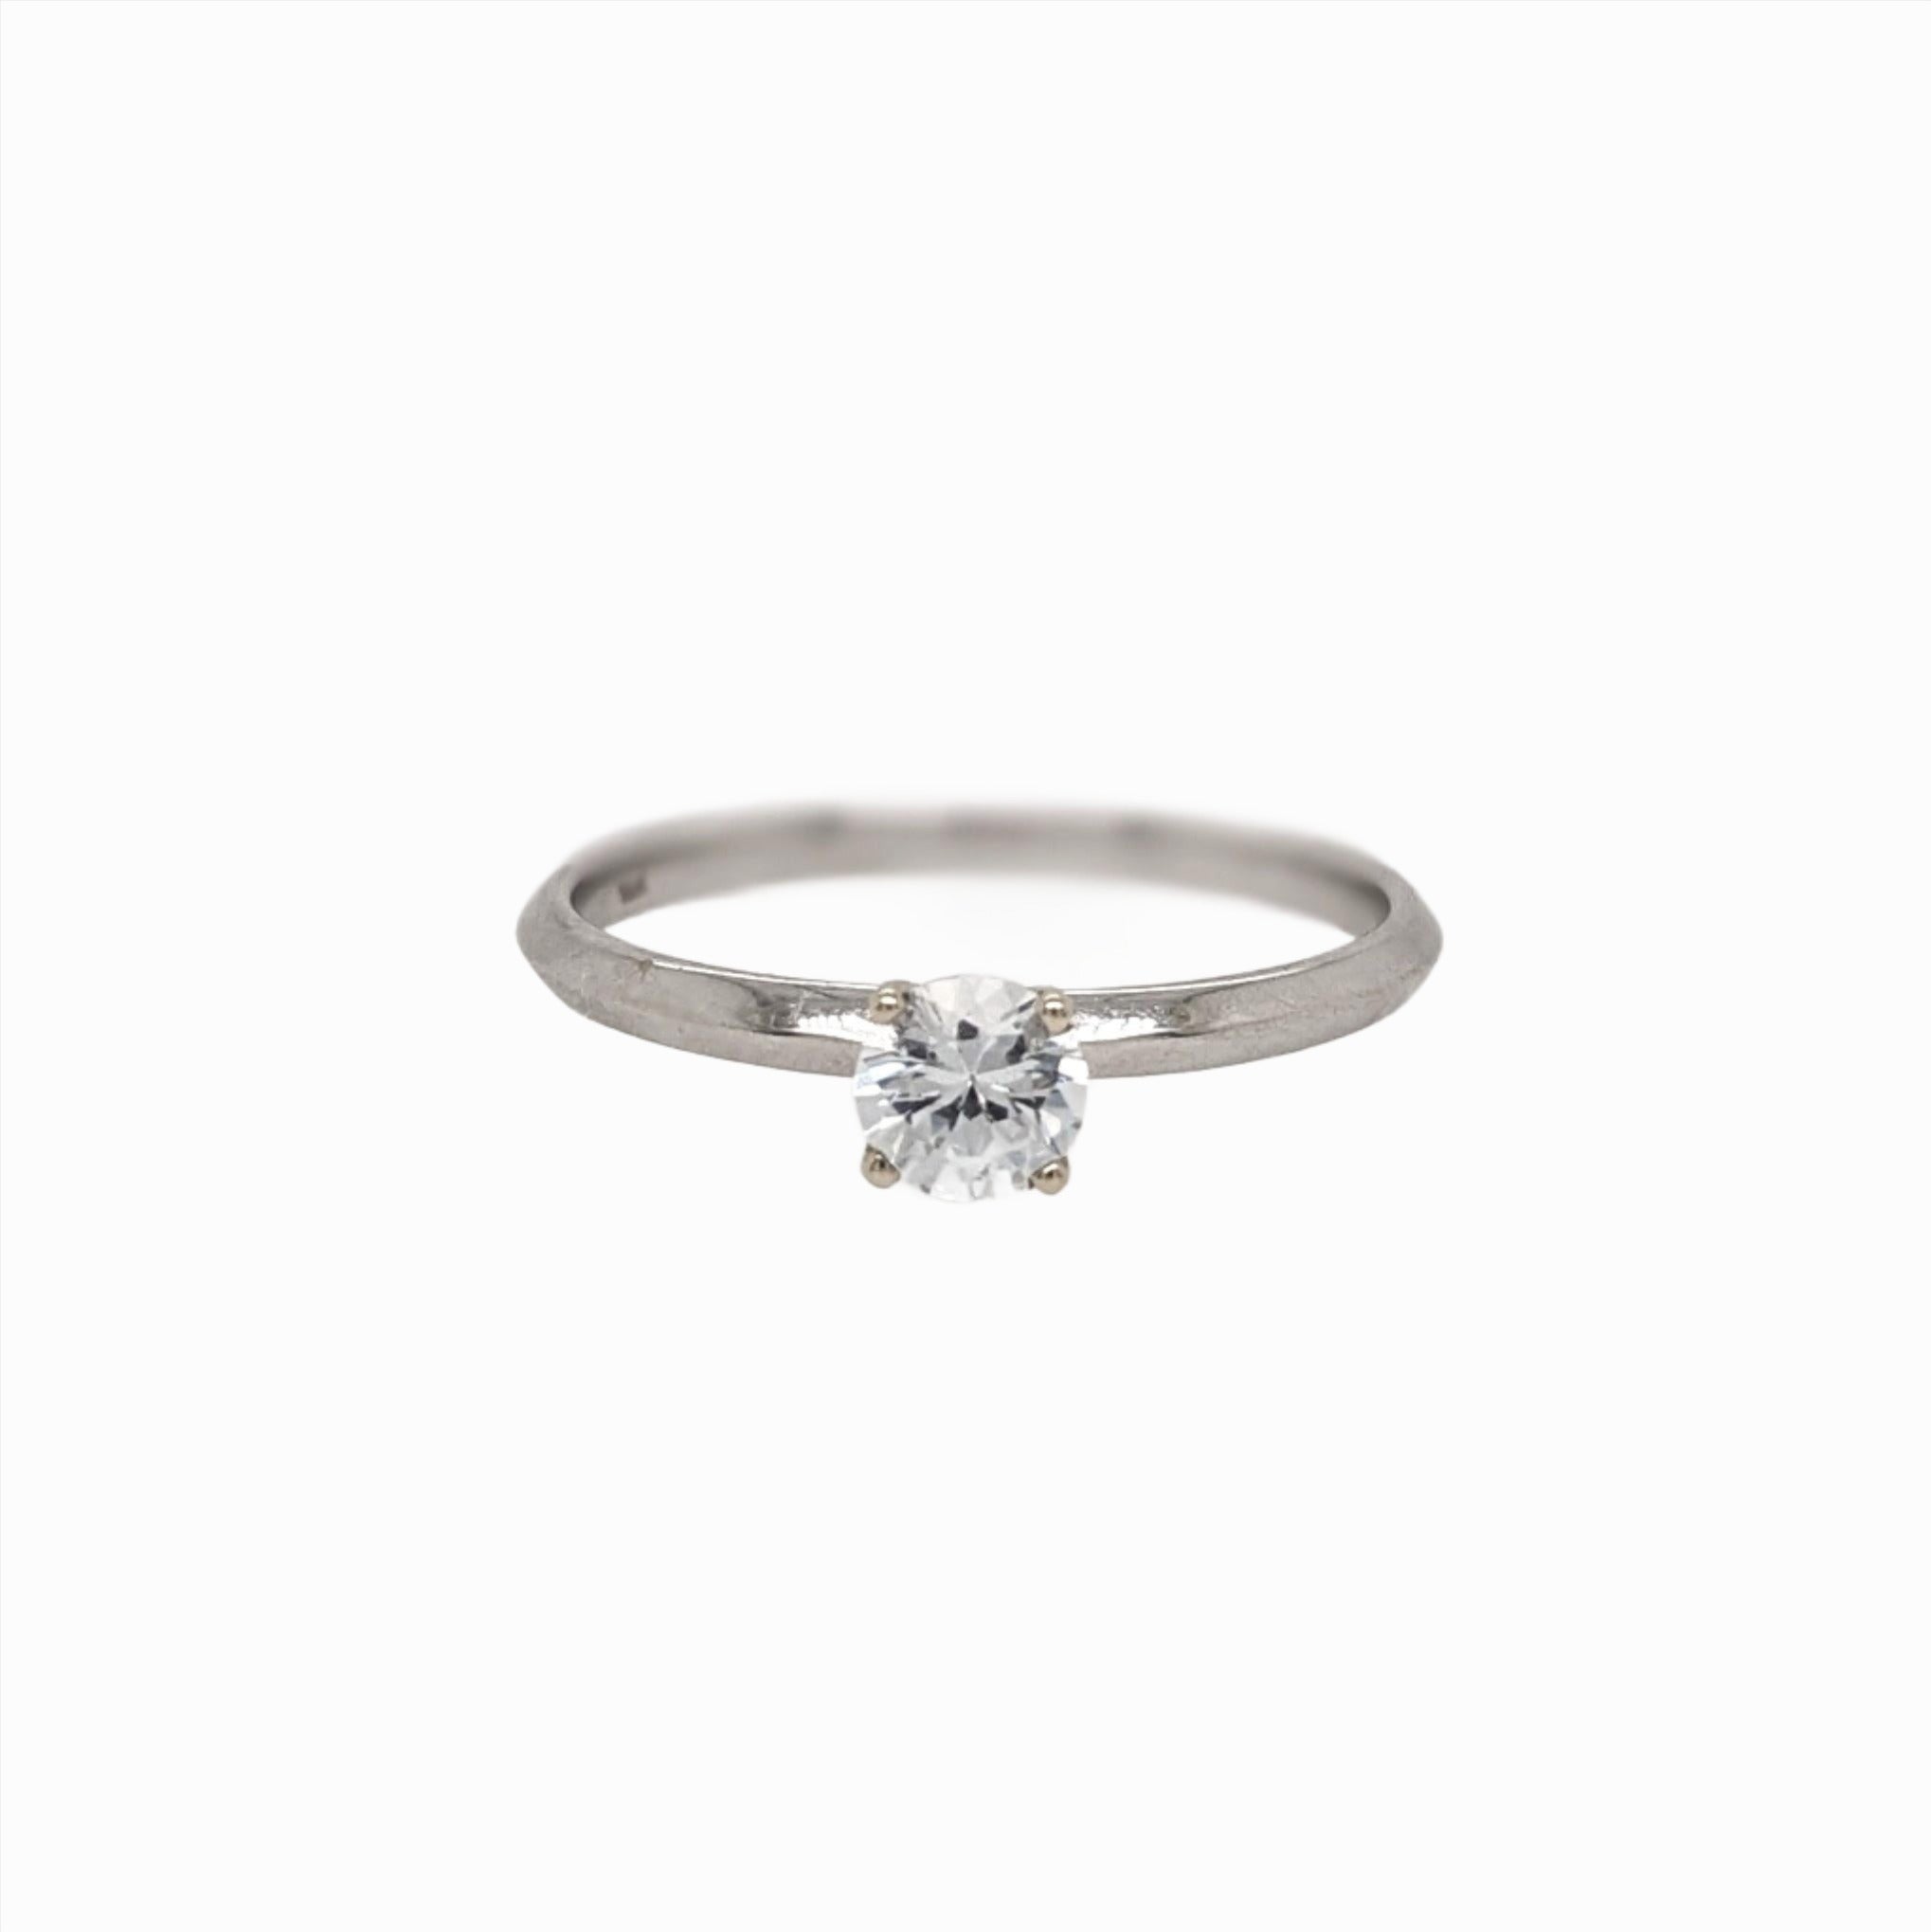 White Sapphire Solitaire Ring in Solid 14K White Gold Round 5mm